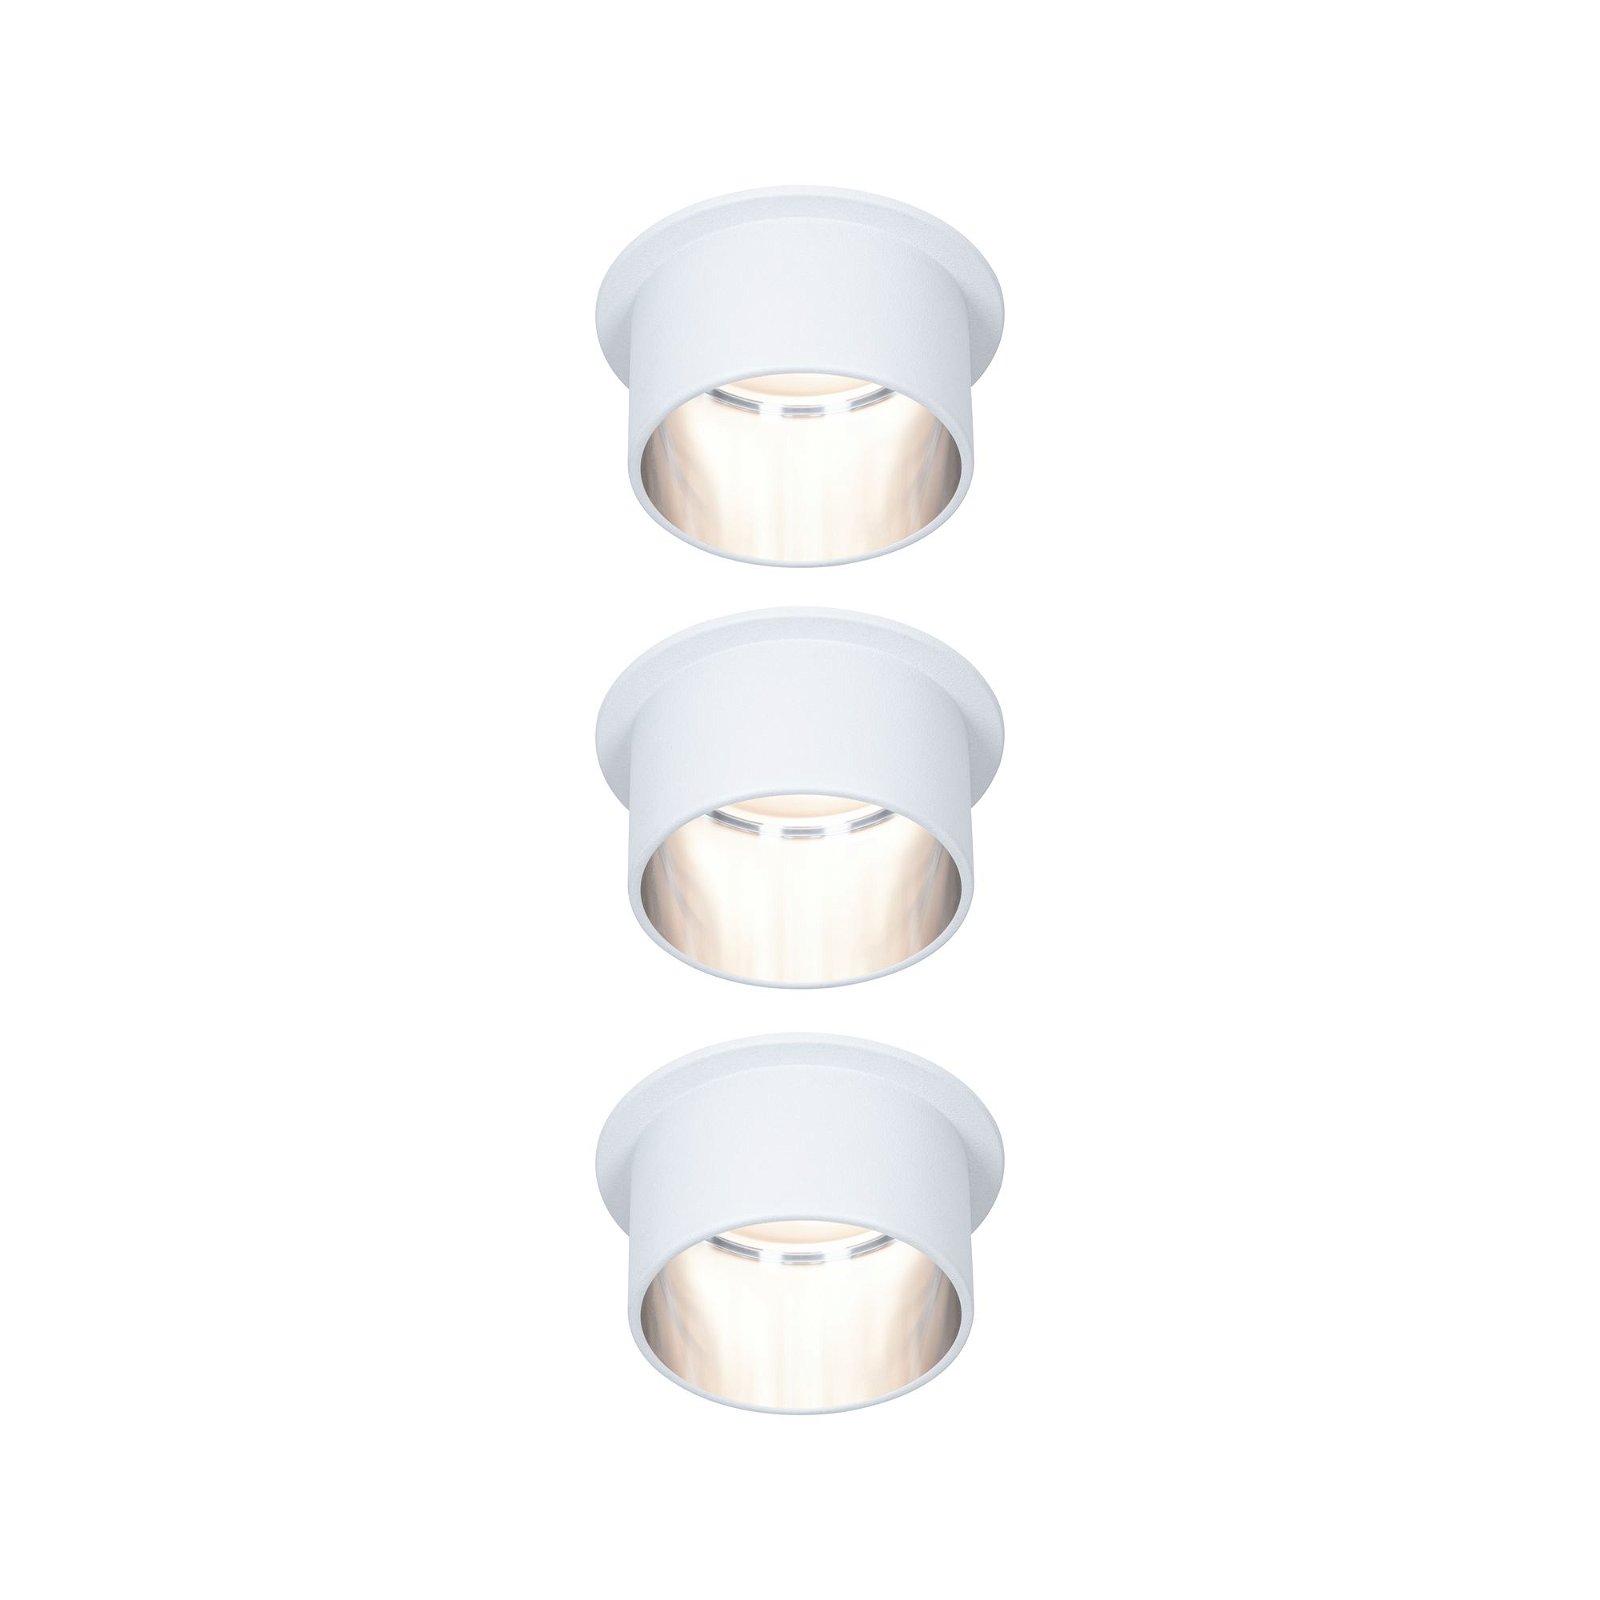 LED Recessed luminaire 3-Step-Dim Gil Coin Basic Set IP44 round 68mm Coin 3x6W 3x470lm 230V dimmable 2700K Matt white/Brushed iron